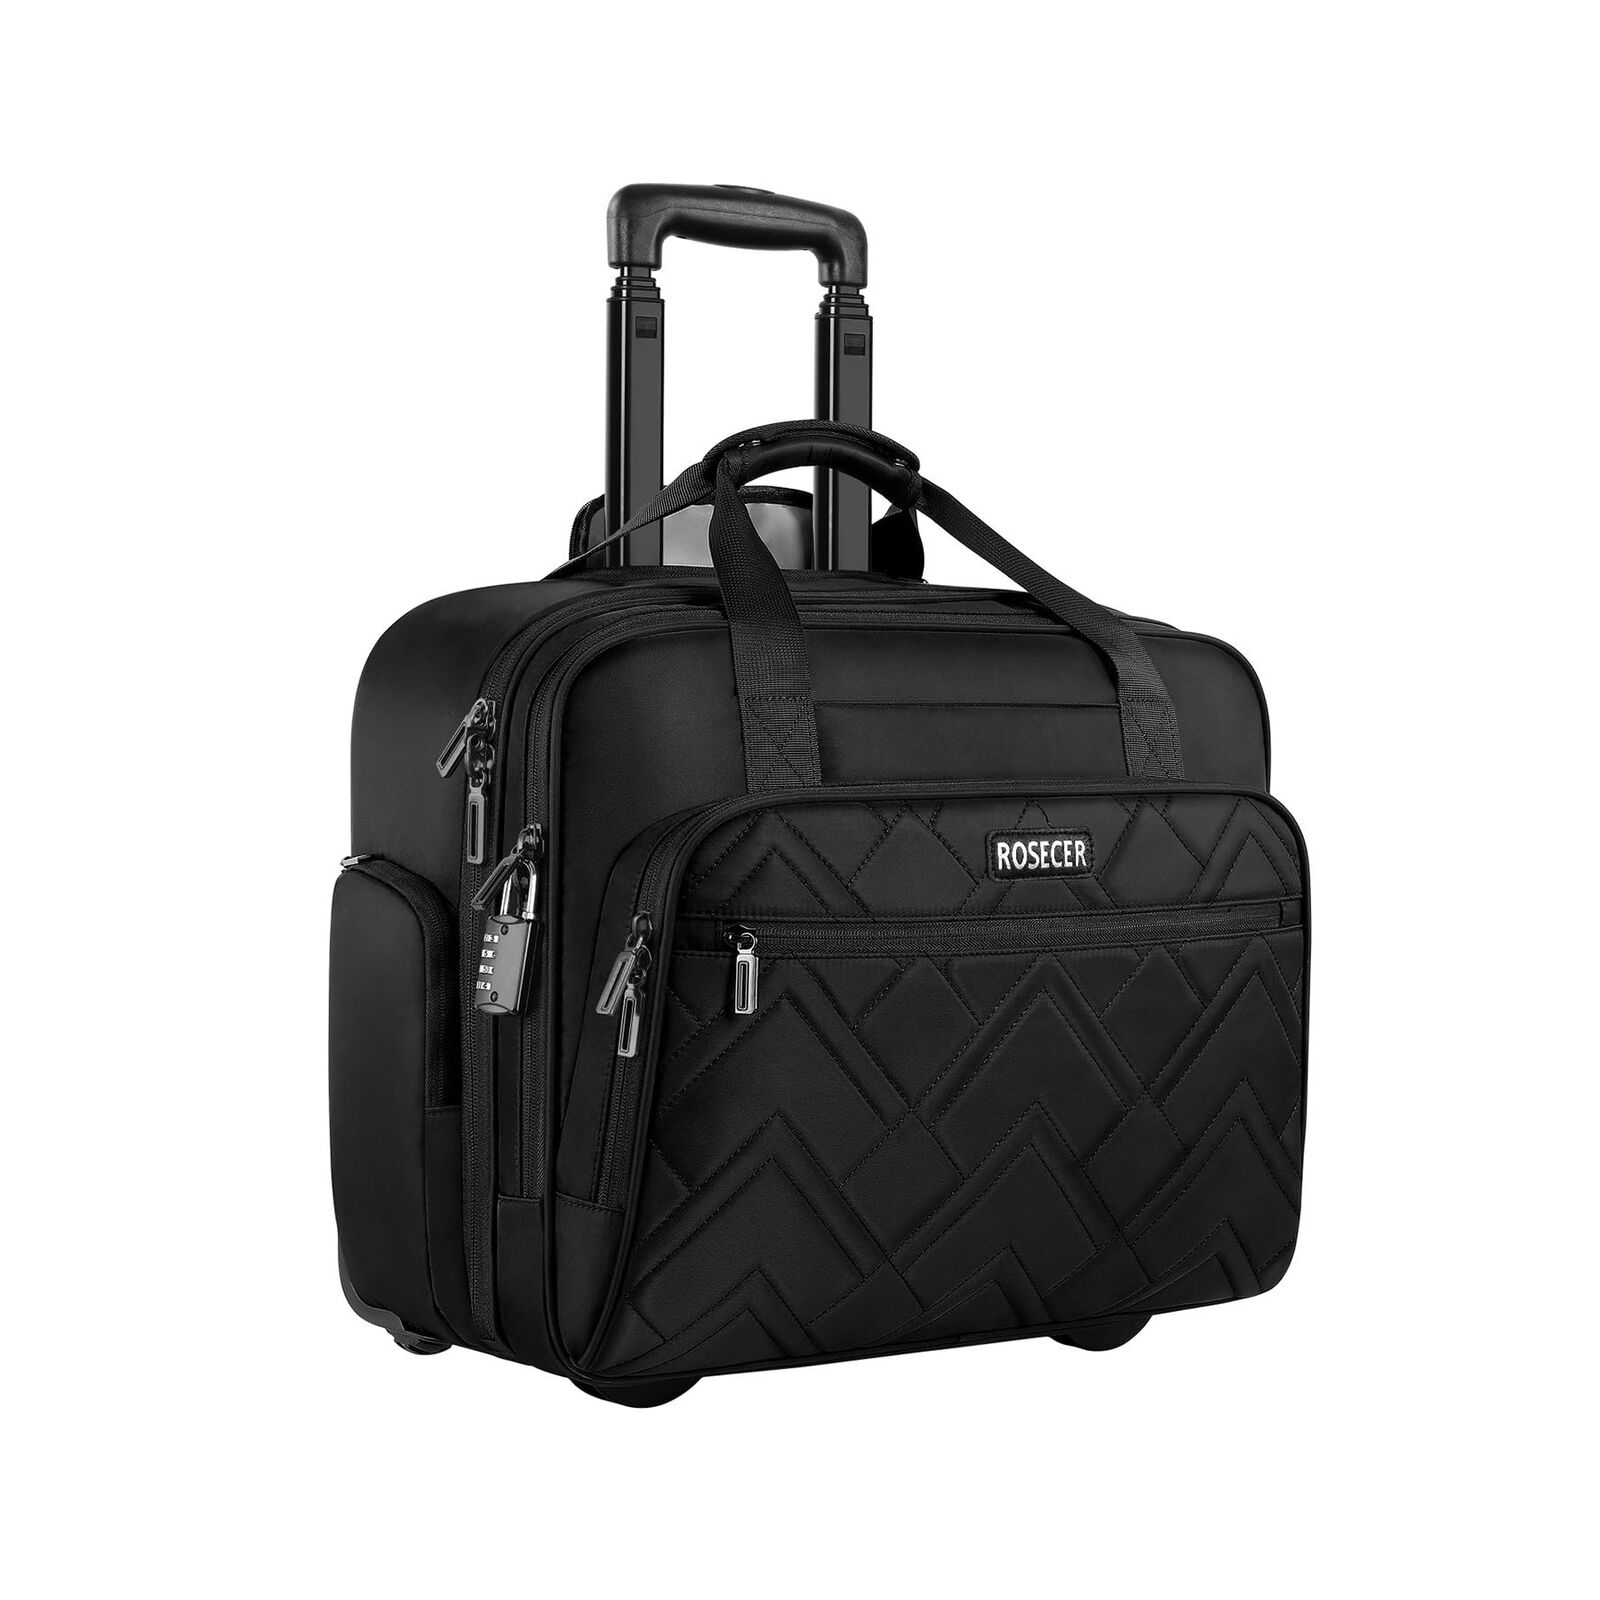 ROSECER Rolling Laptop Bag, 17.3 Inch Premium Laptop Briefcases with Wheels f...